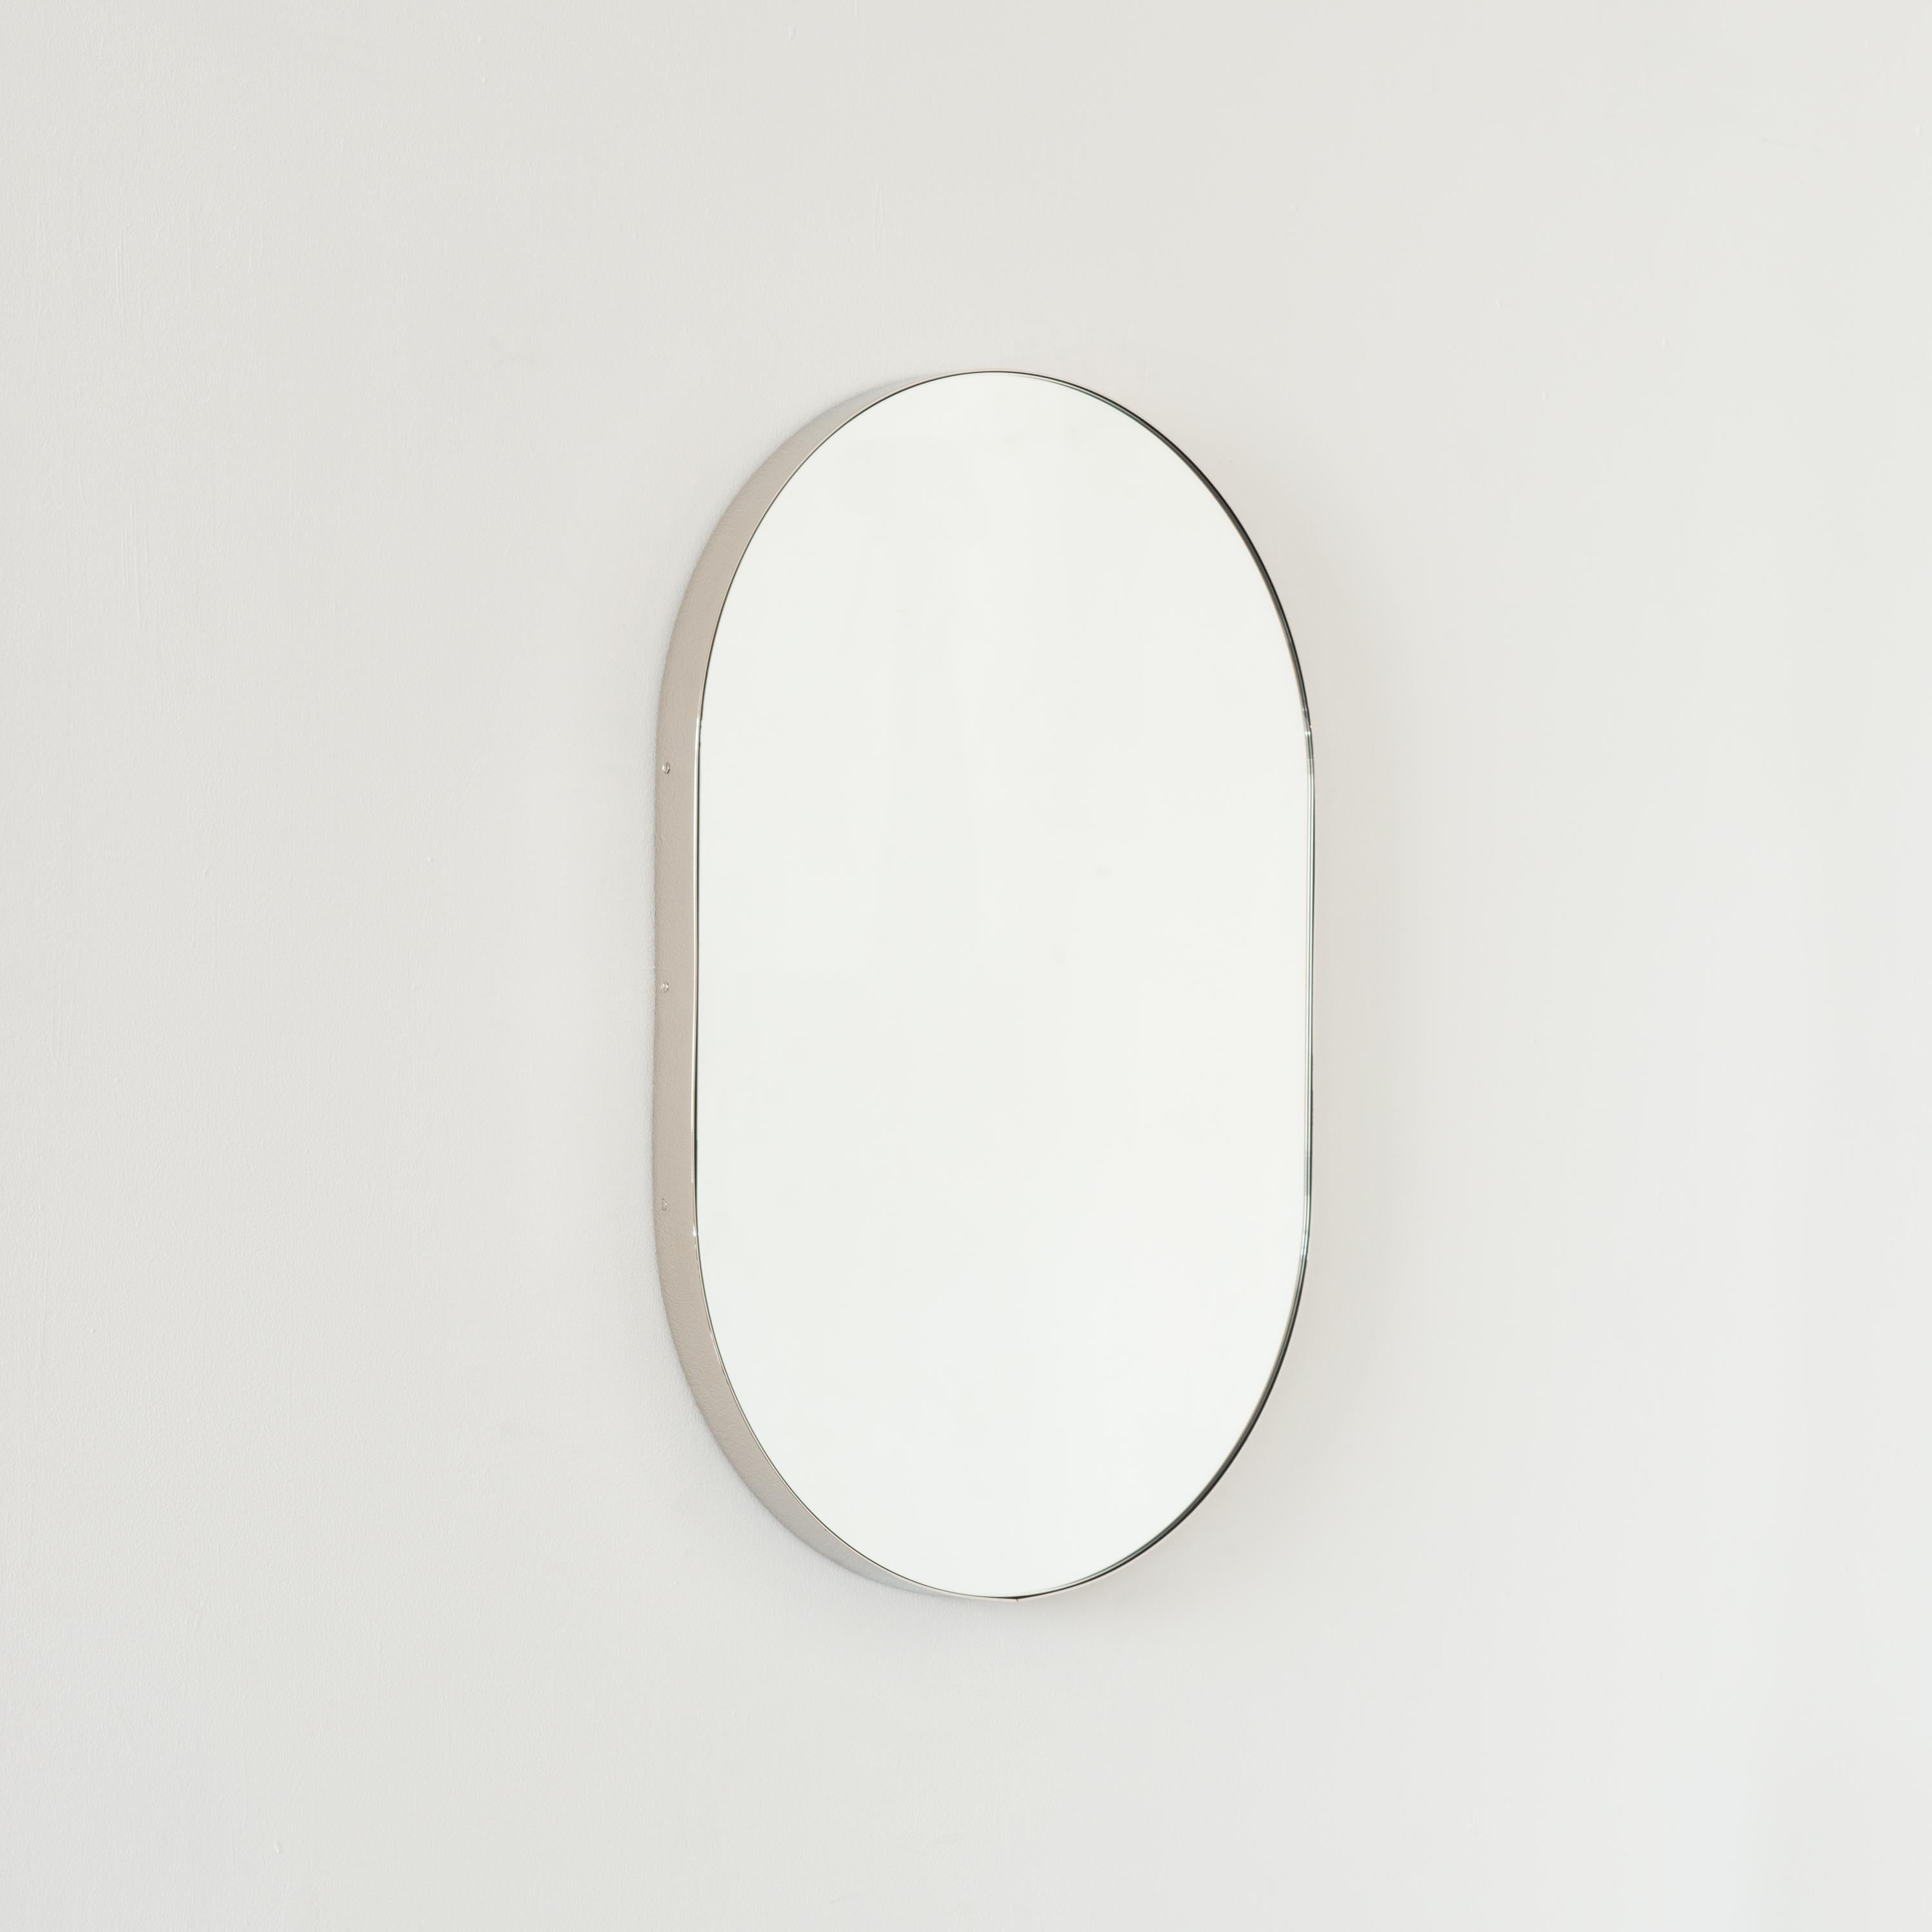 British Capsula Pill shaped Customisable Contemporary Mirror, Nickel Plated Frame, Small For Sale